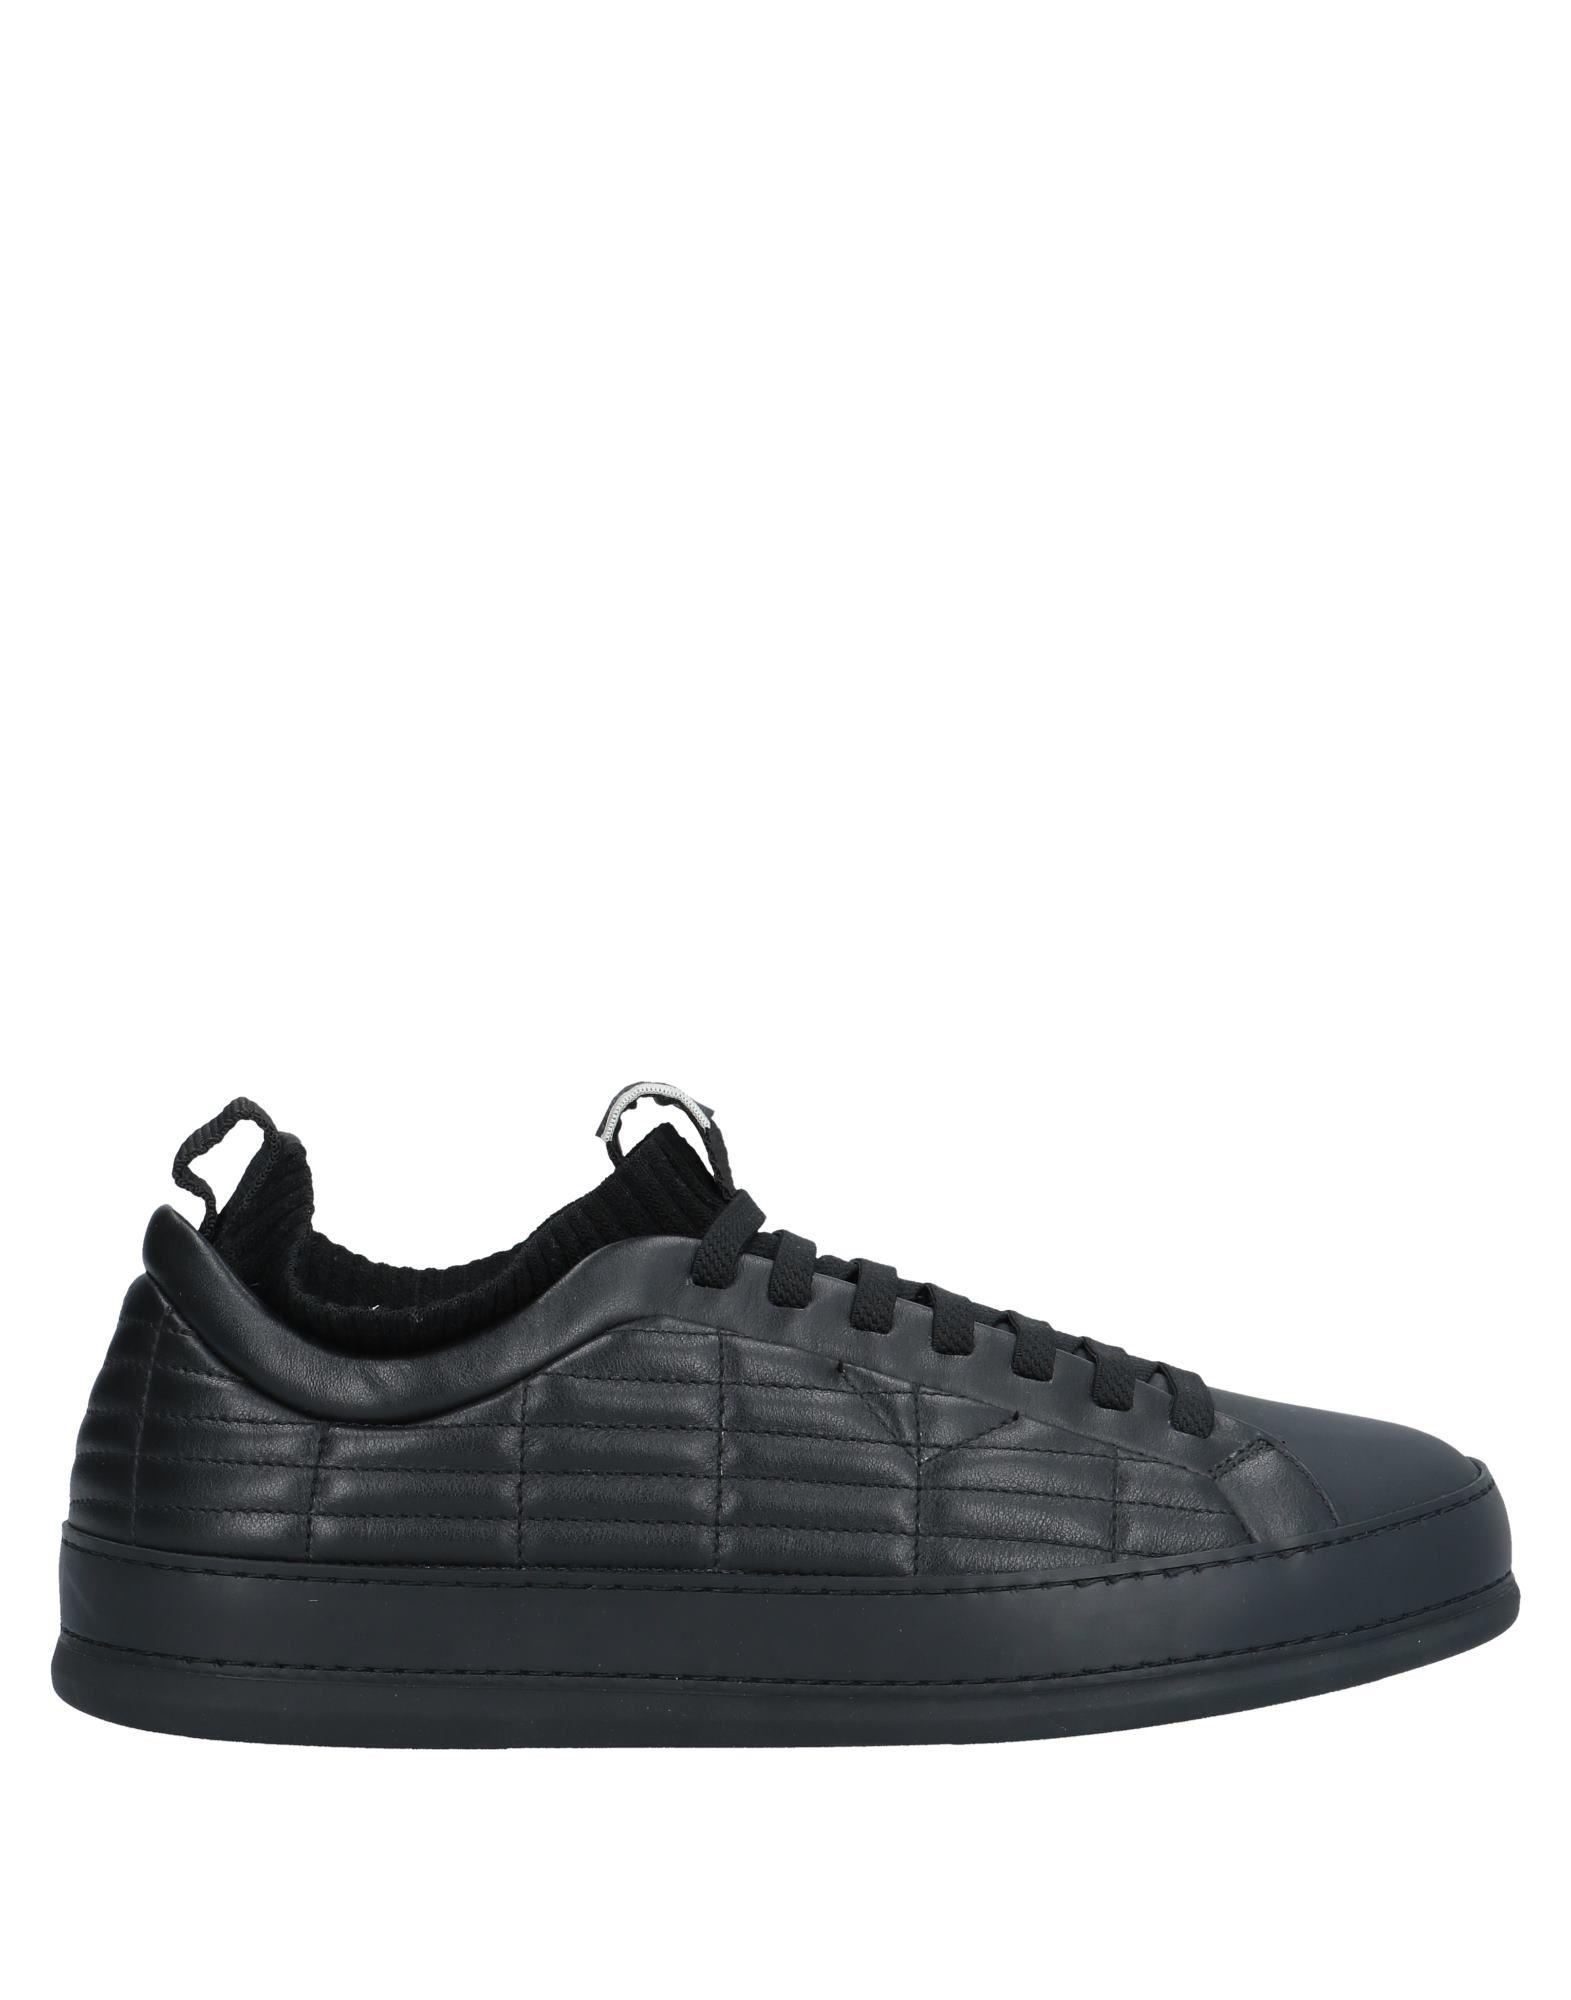 Z Zegna Leather Low-tops & Sneakers in Black for Men - Lyst